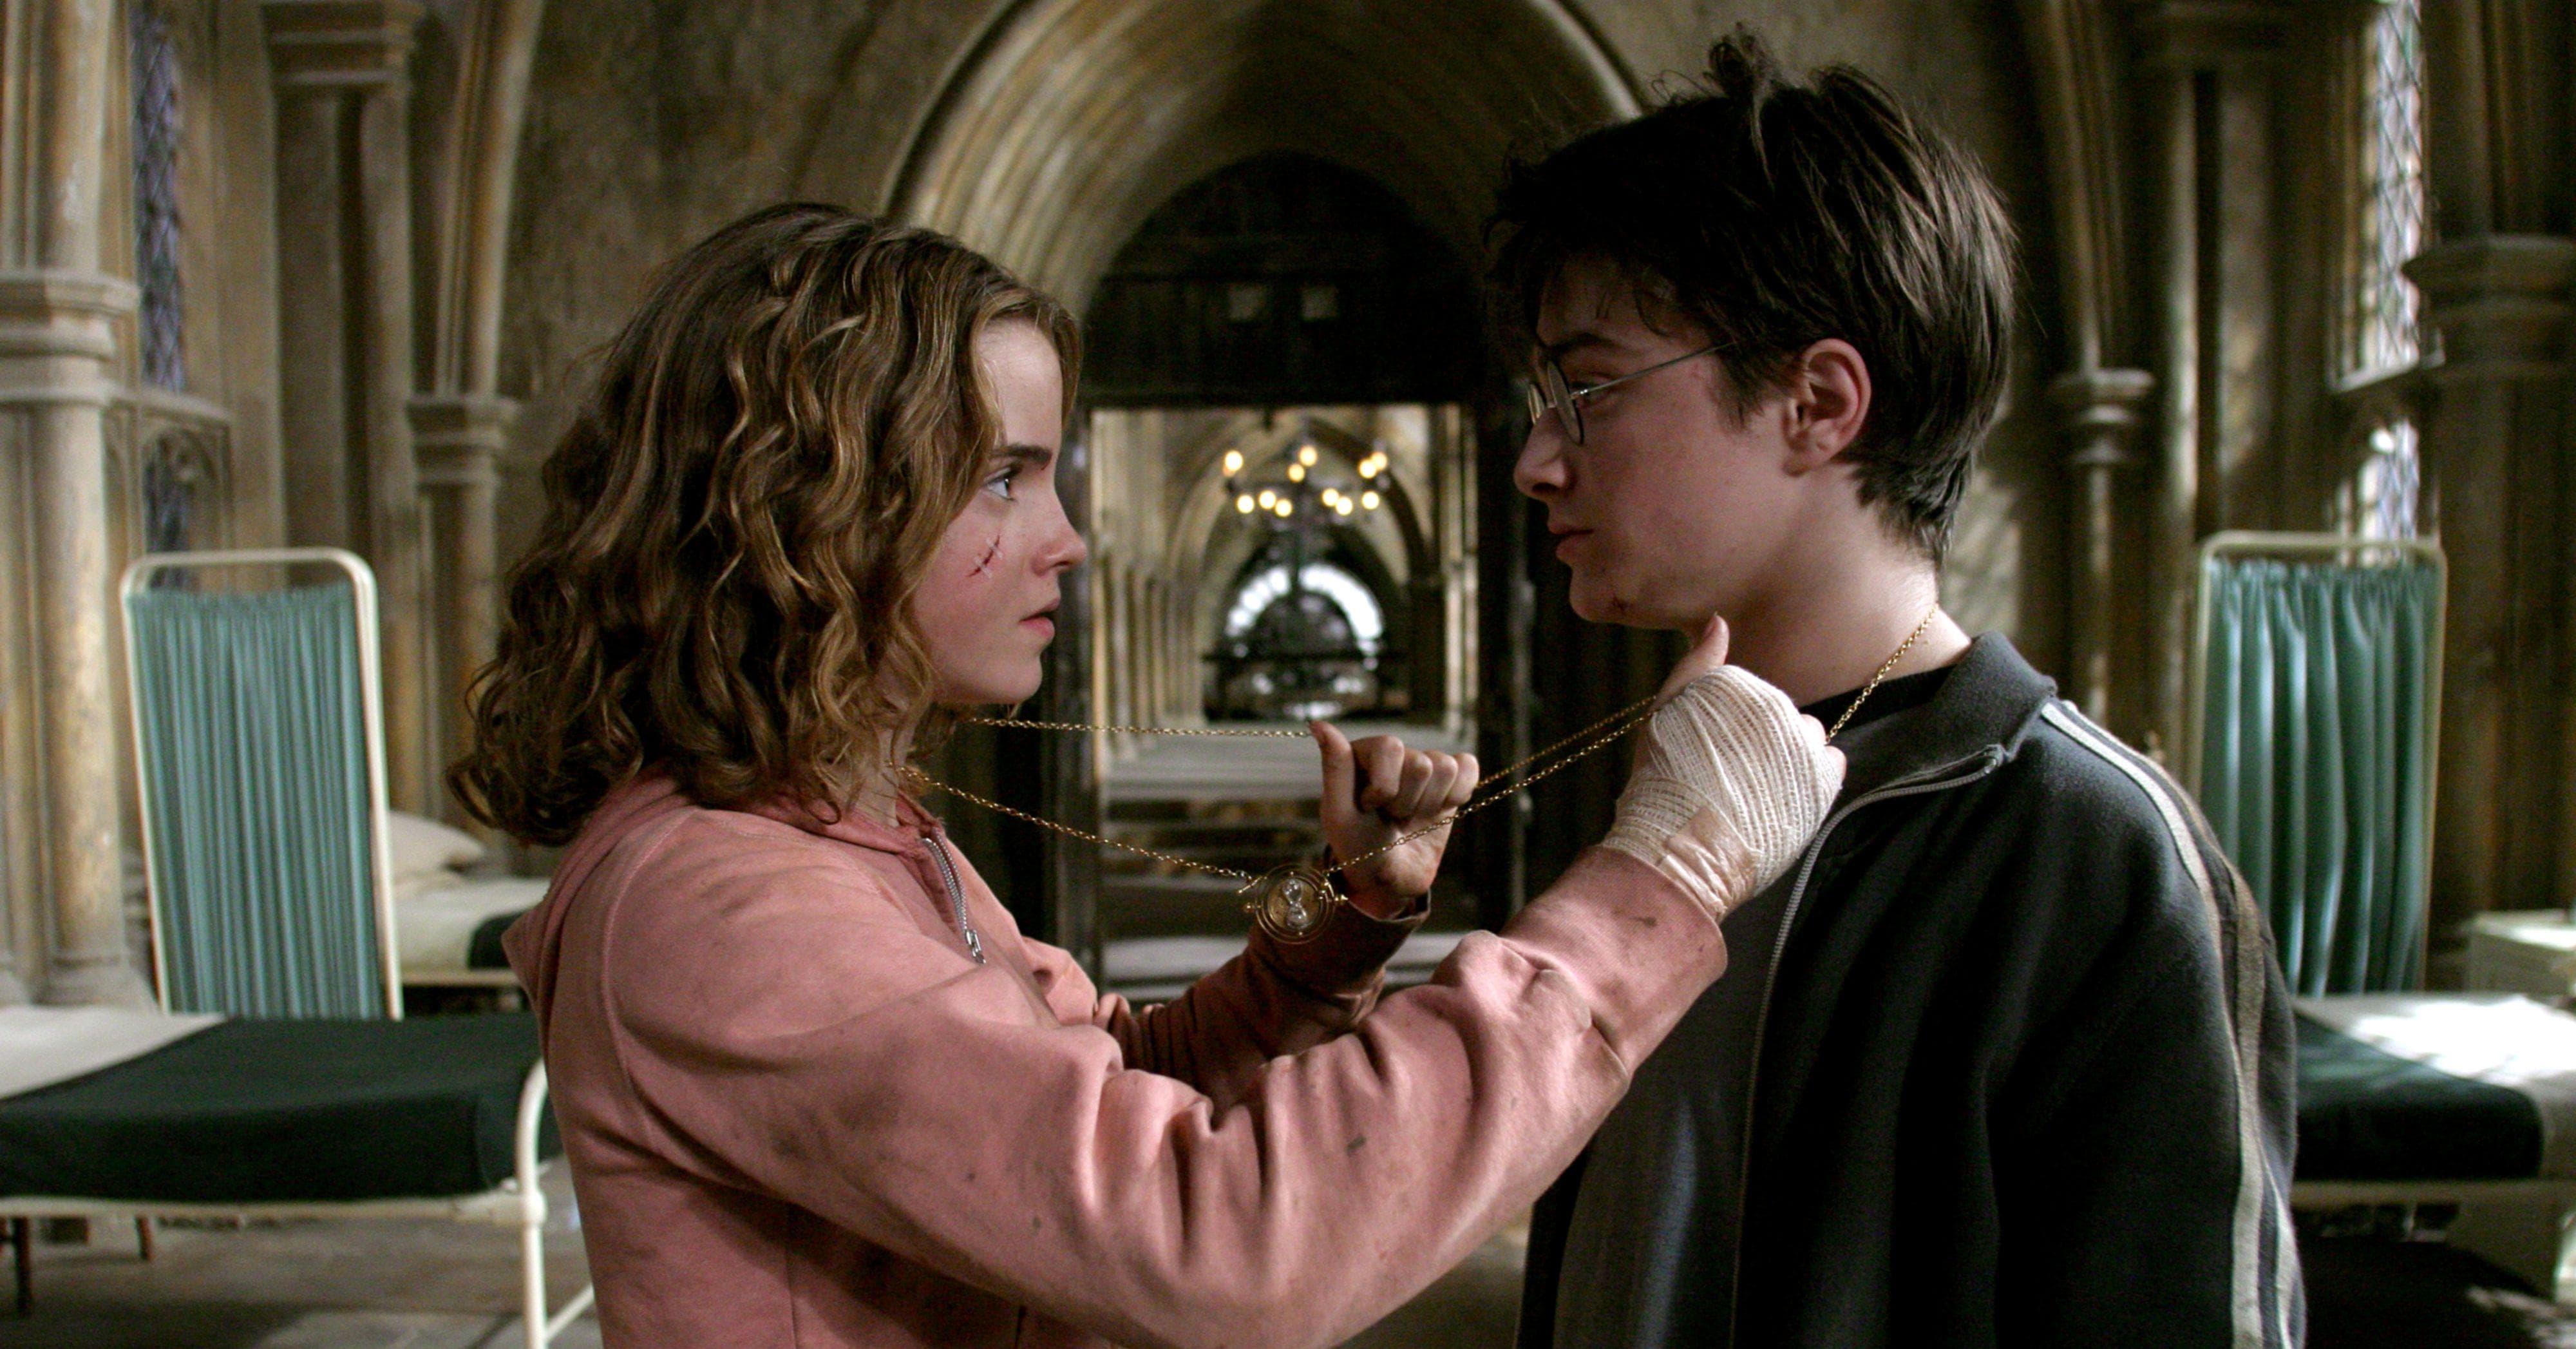 5 Reasons Why The Prisoner of Azkaban is the Best Harry Potter Movie